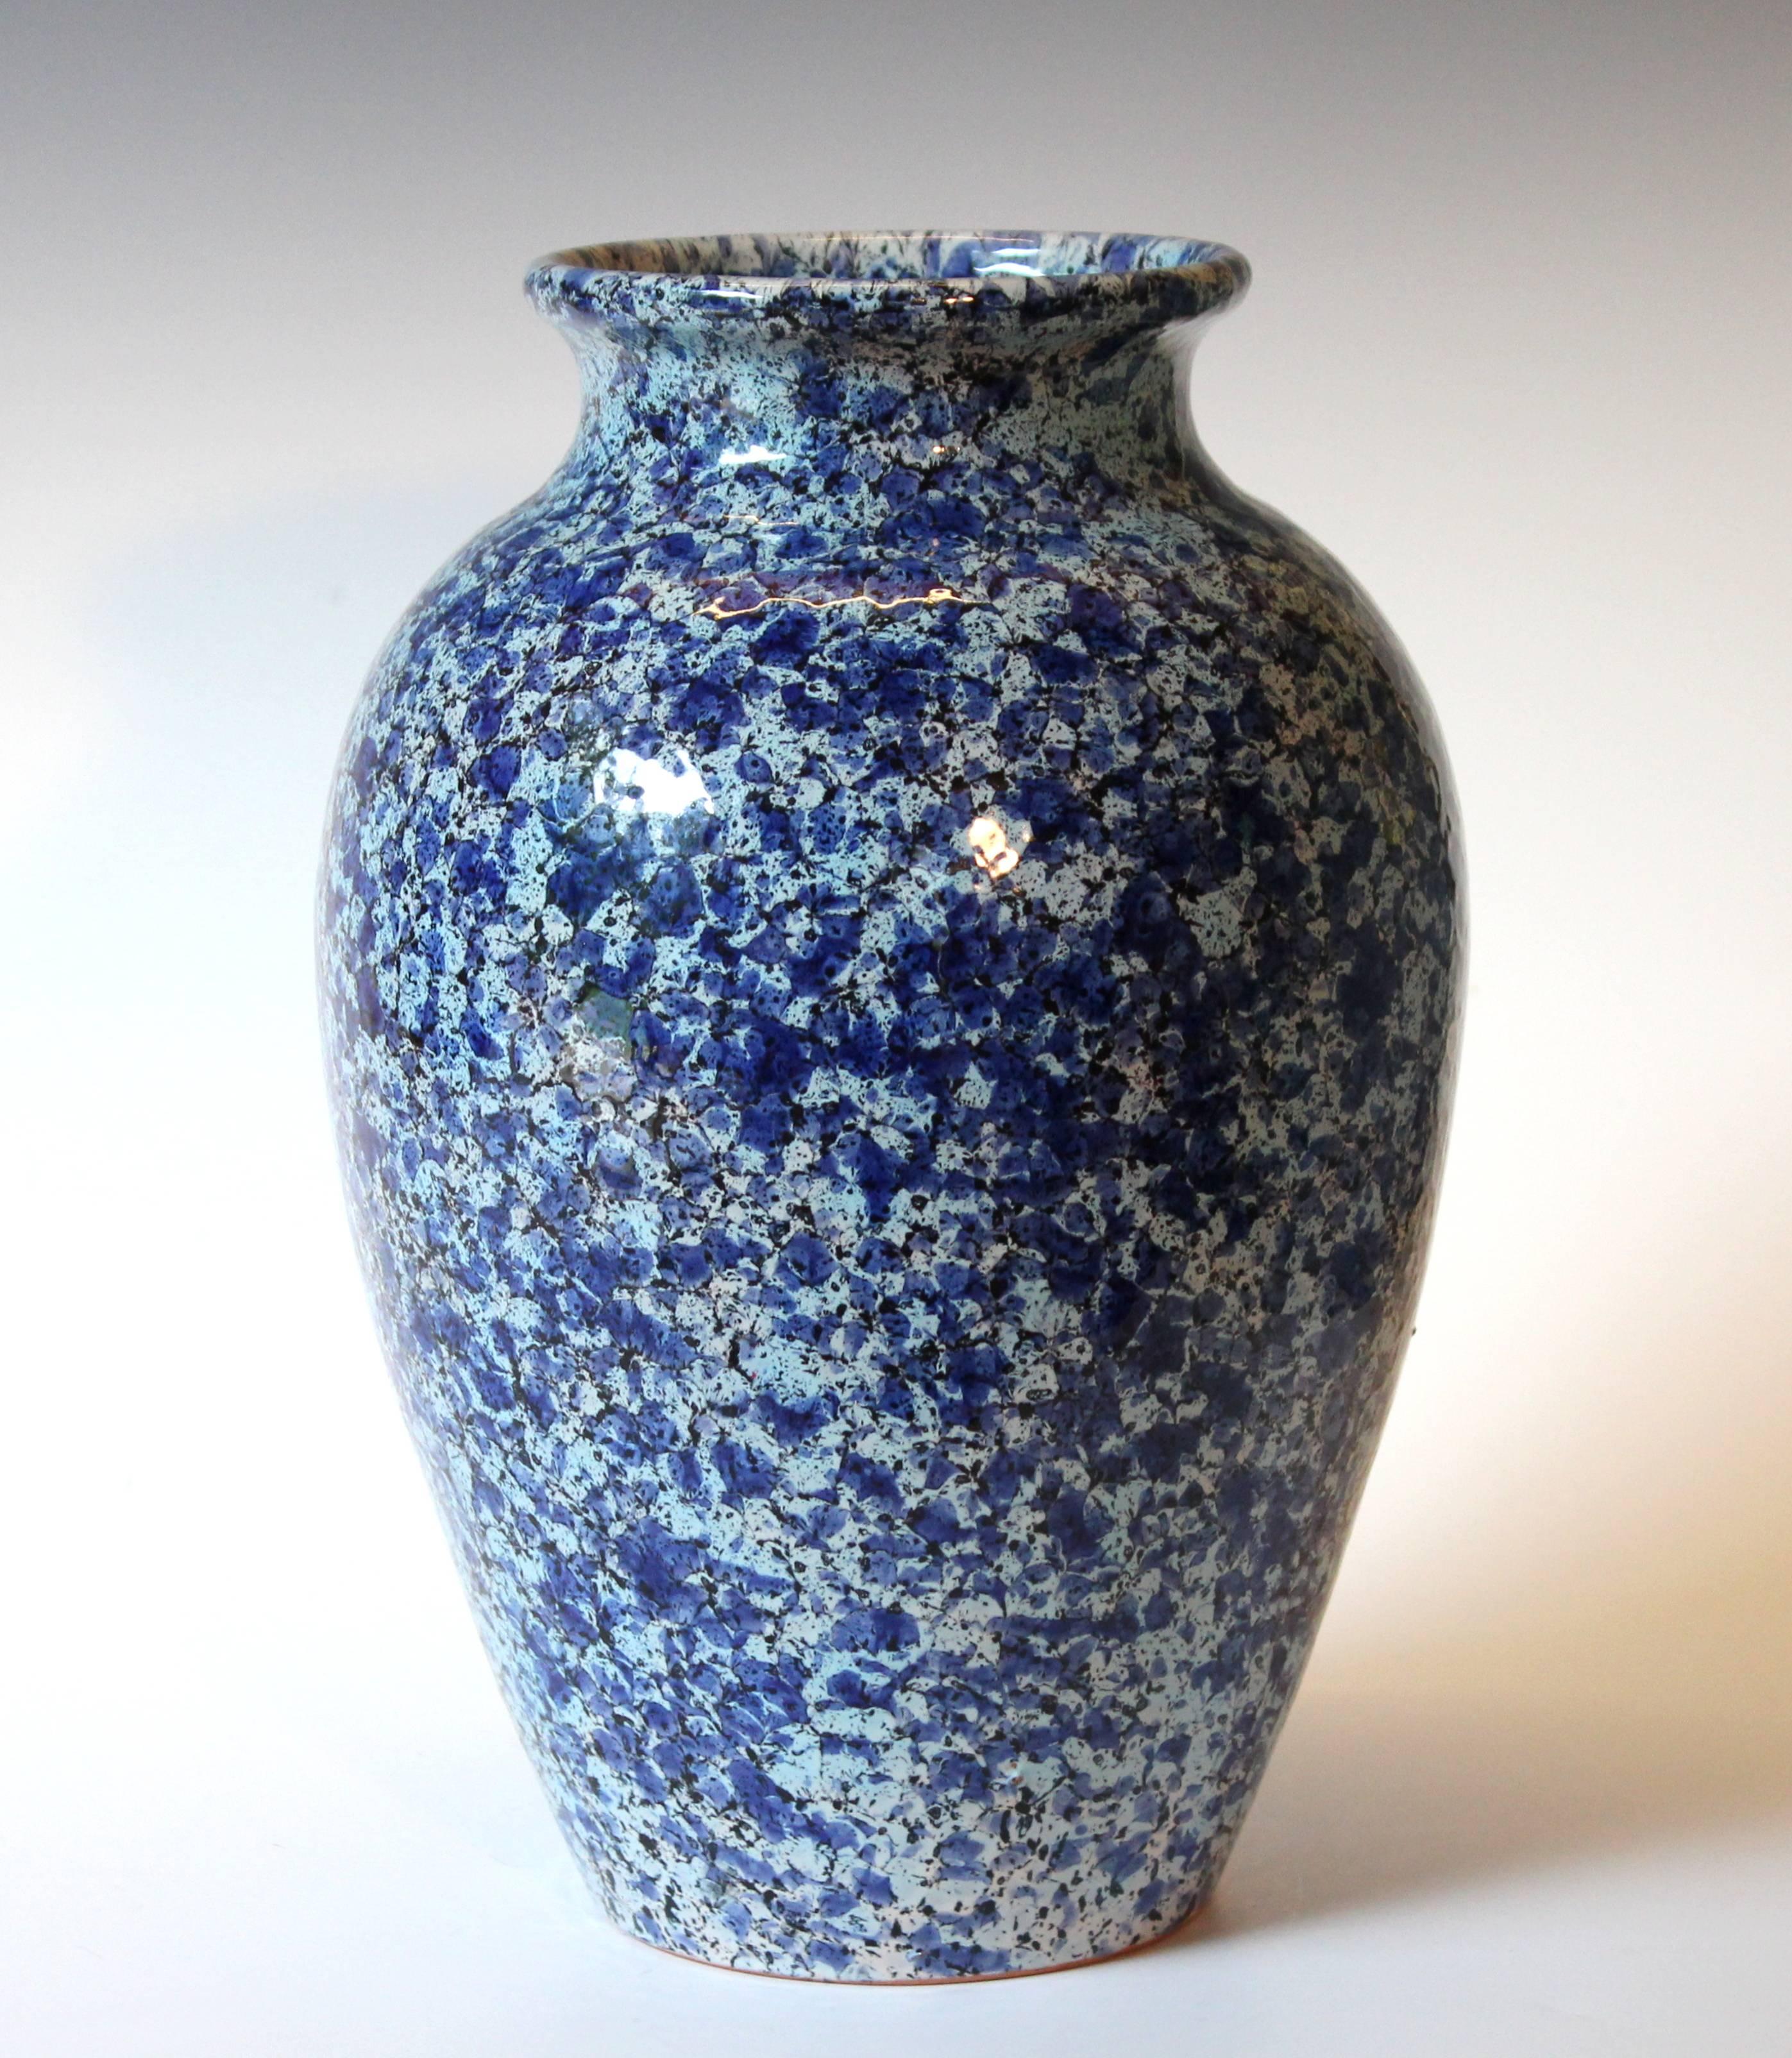 Vintage Italica Ars 1960s Italian Art Pottery Vase Mottled Blue and White Glaze In Excellent Condition For Sale In Wilton, CT